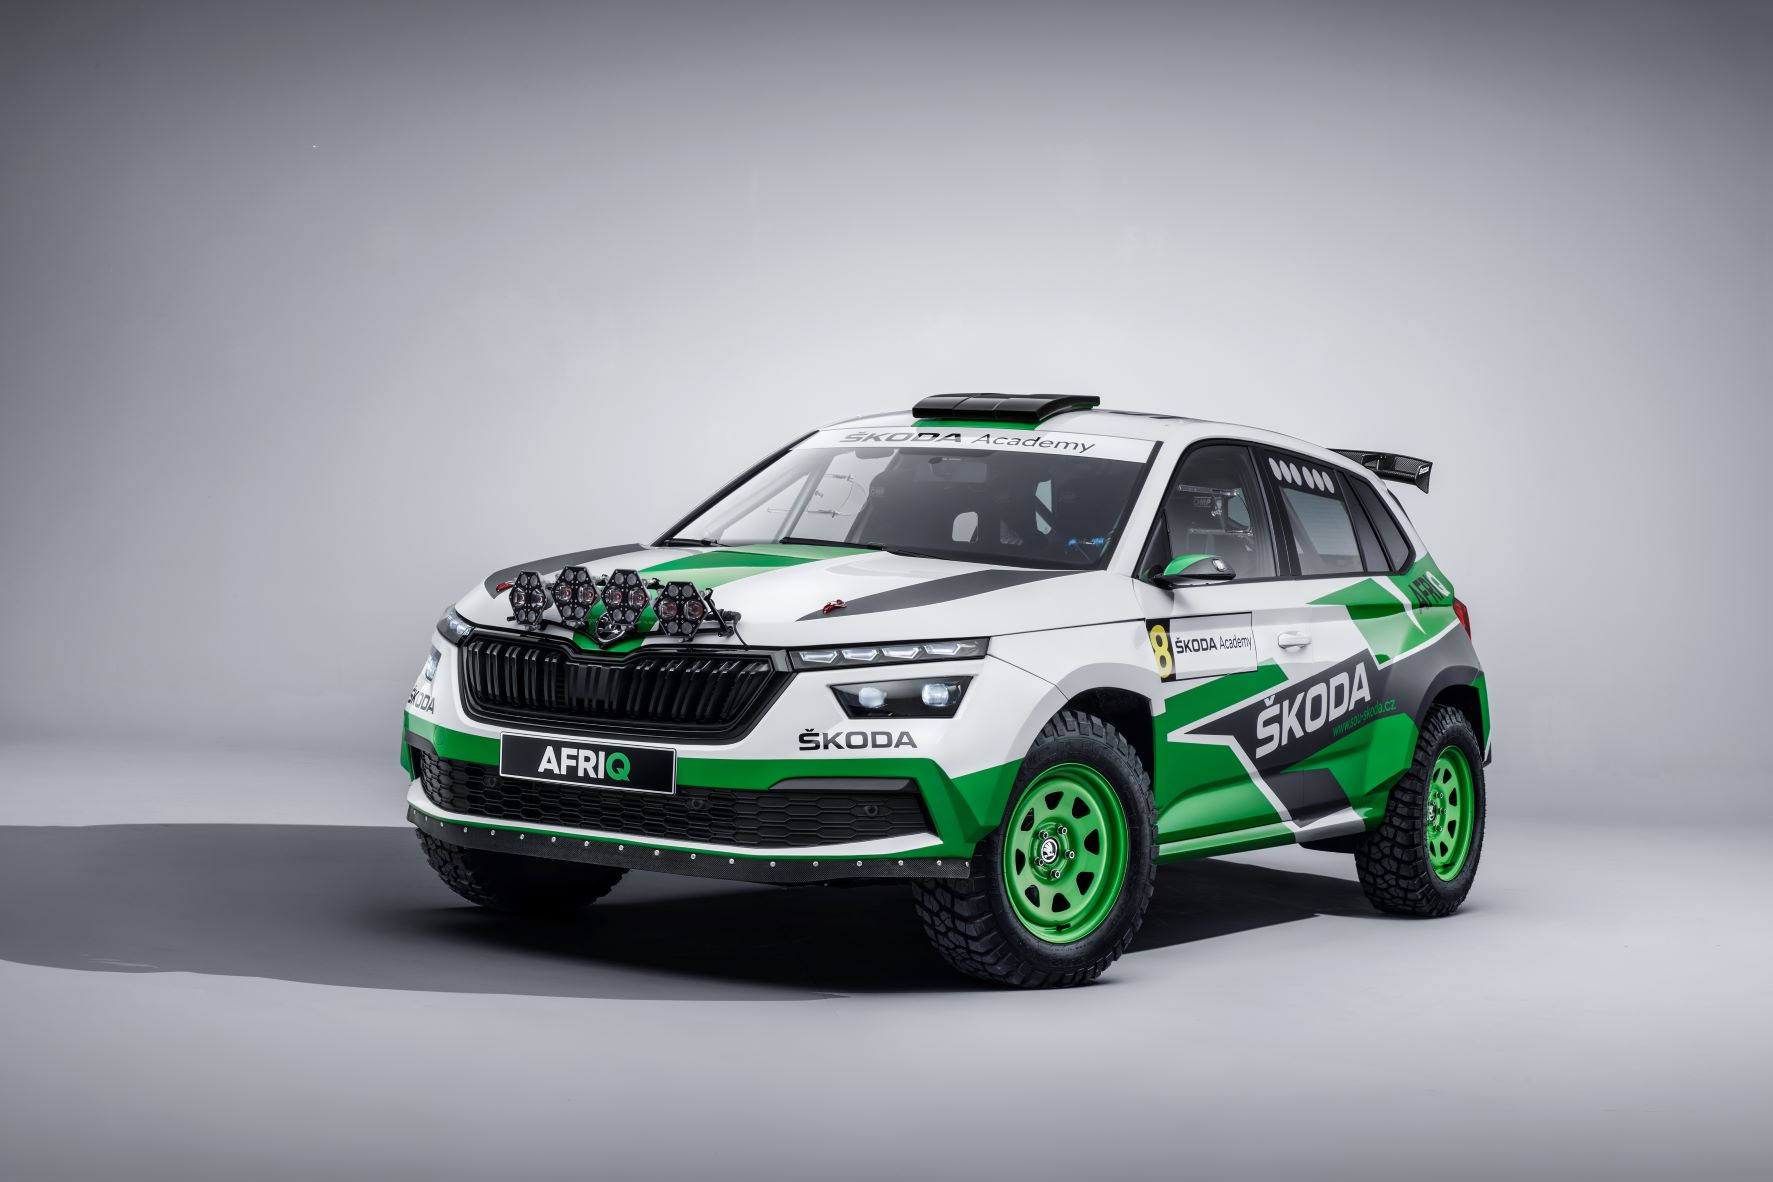 Front three quarters view of the Skoda Afriq rally concept car